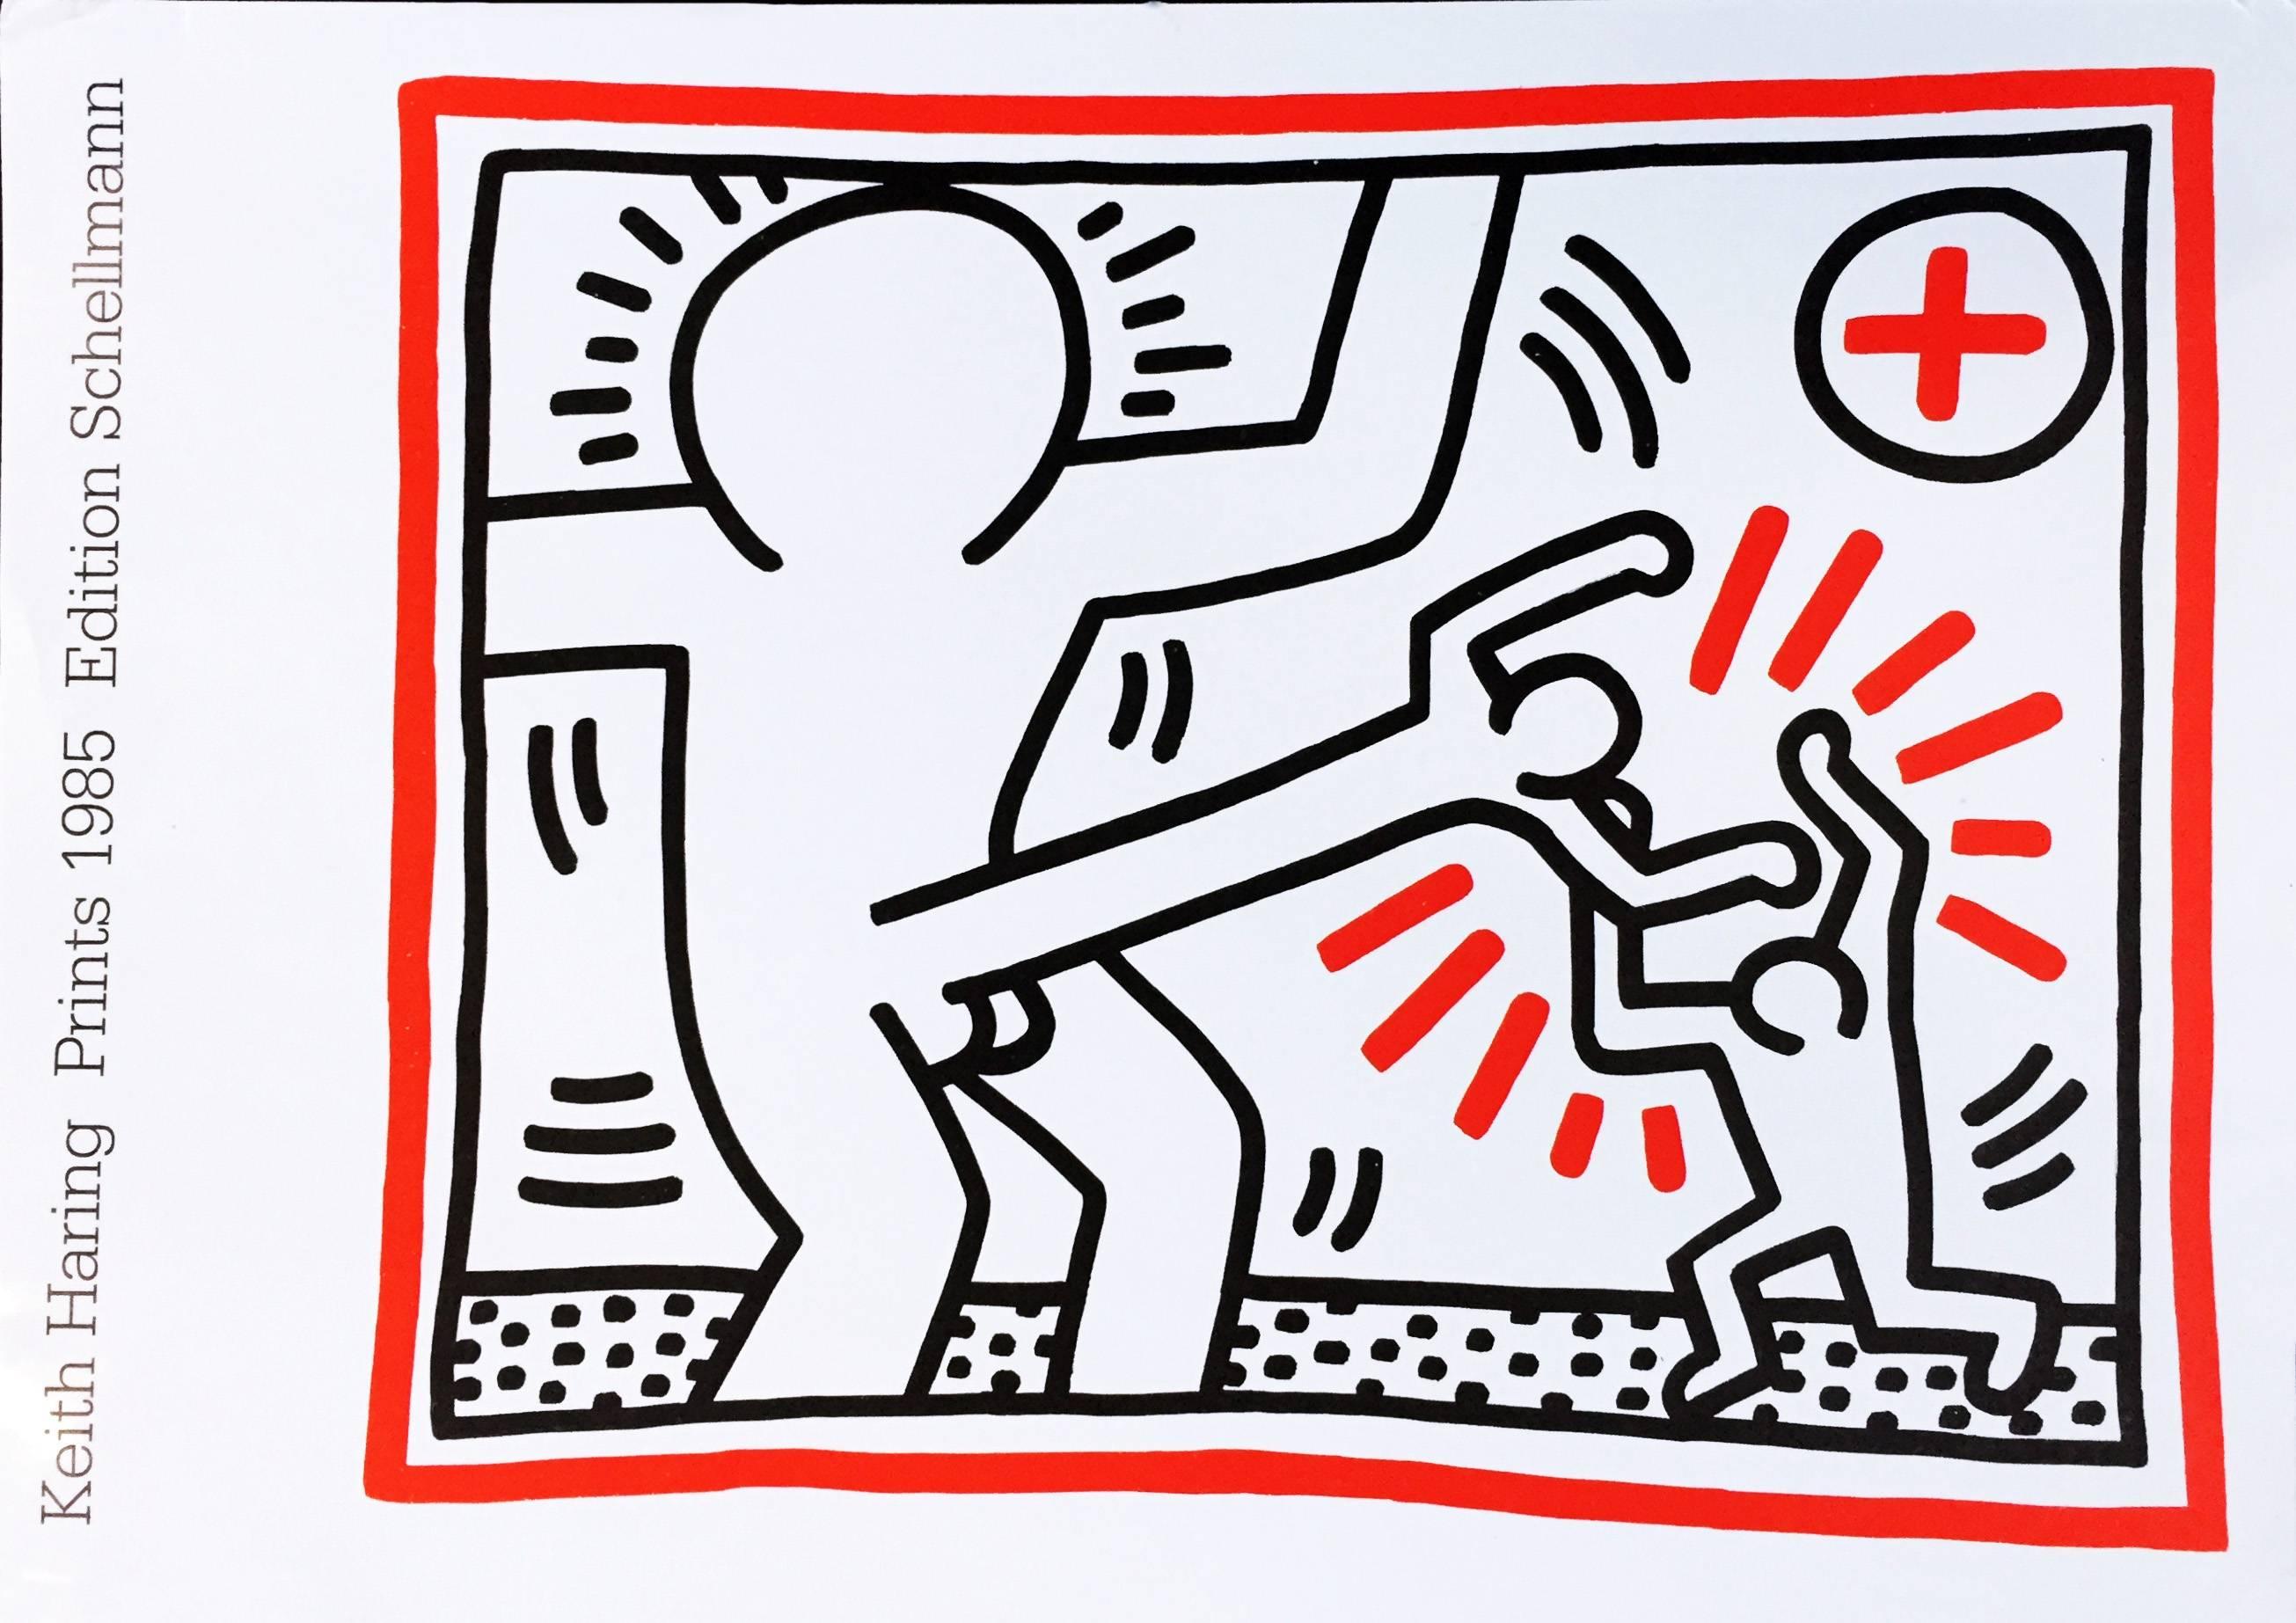 Rare Haring announcement card, Munich, Germany - Pop Art Art by (after) Keith Haring